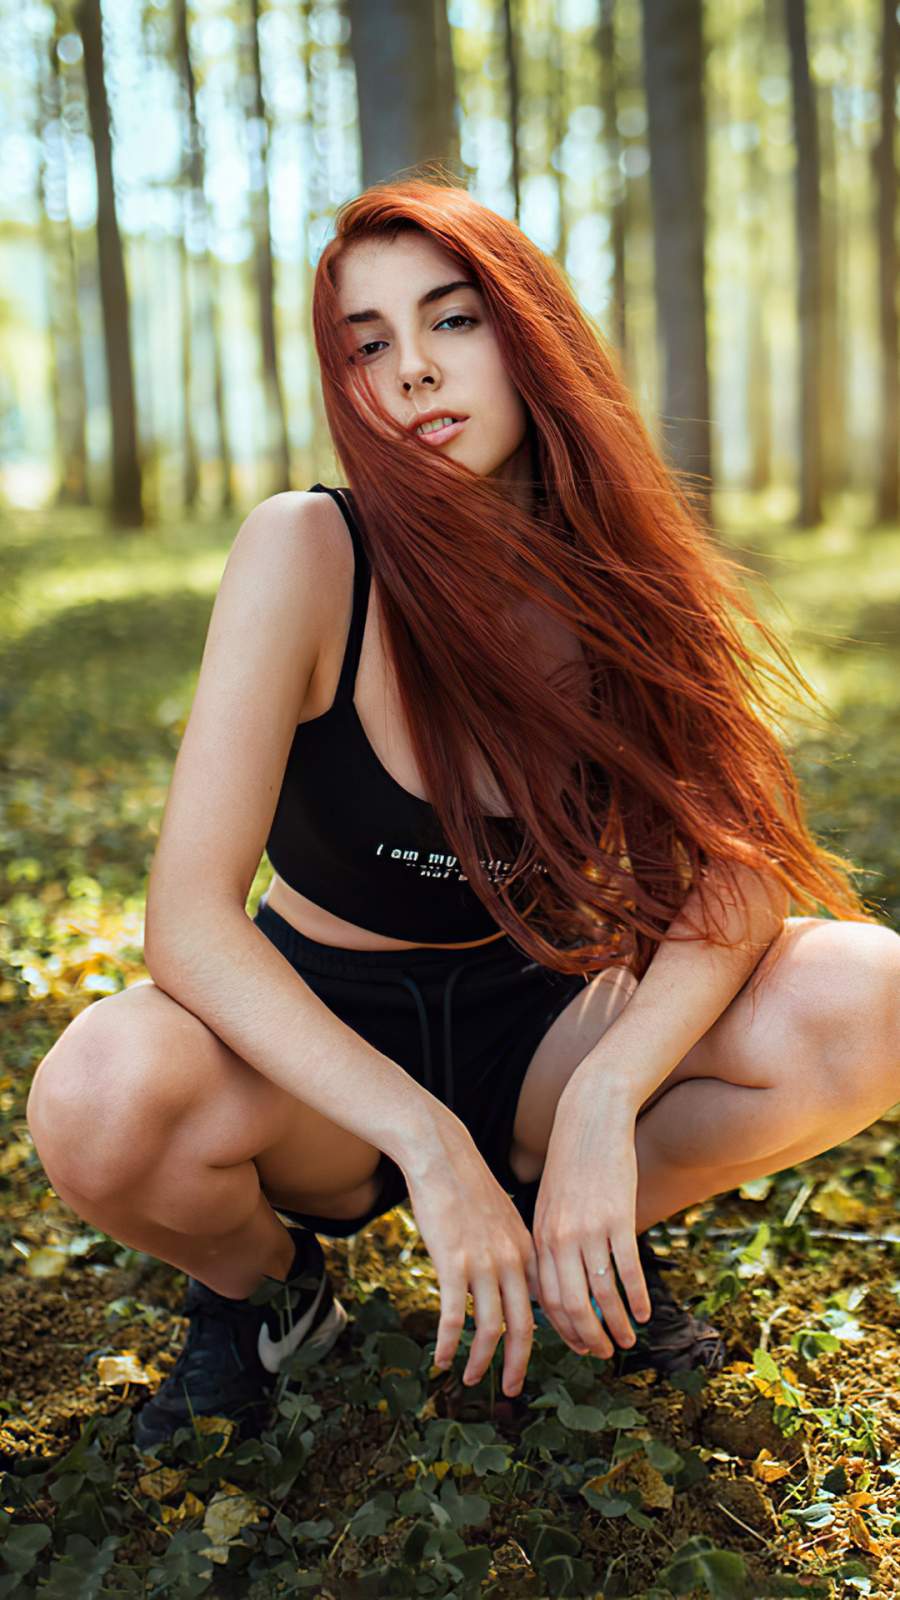 Redhead Girl In Forest IPhone Wallpapers IPhone Wallpapers